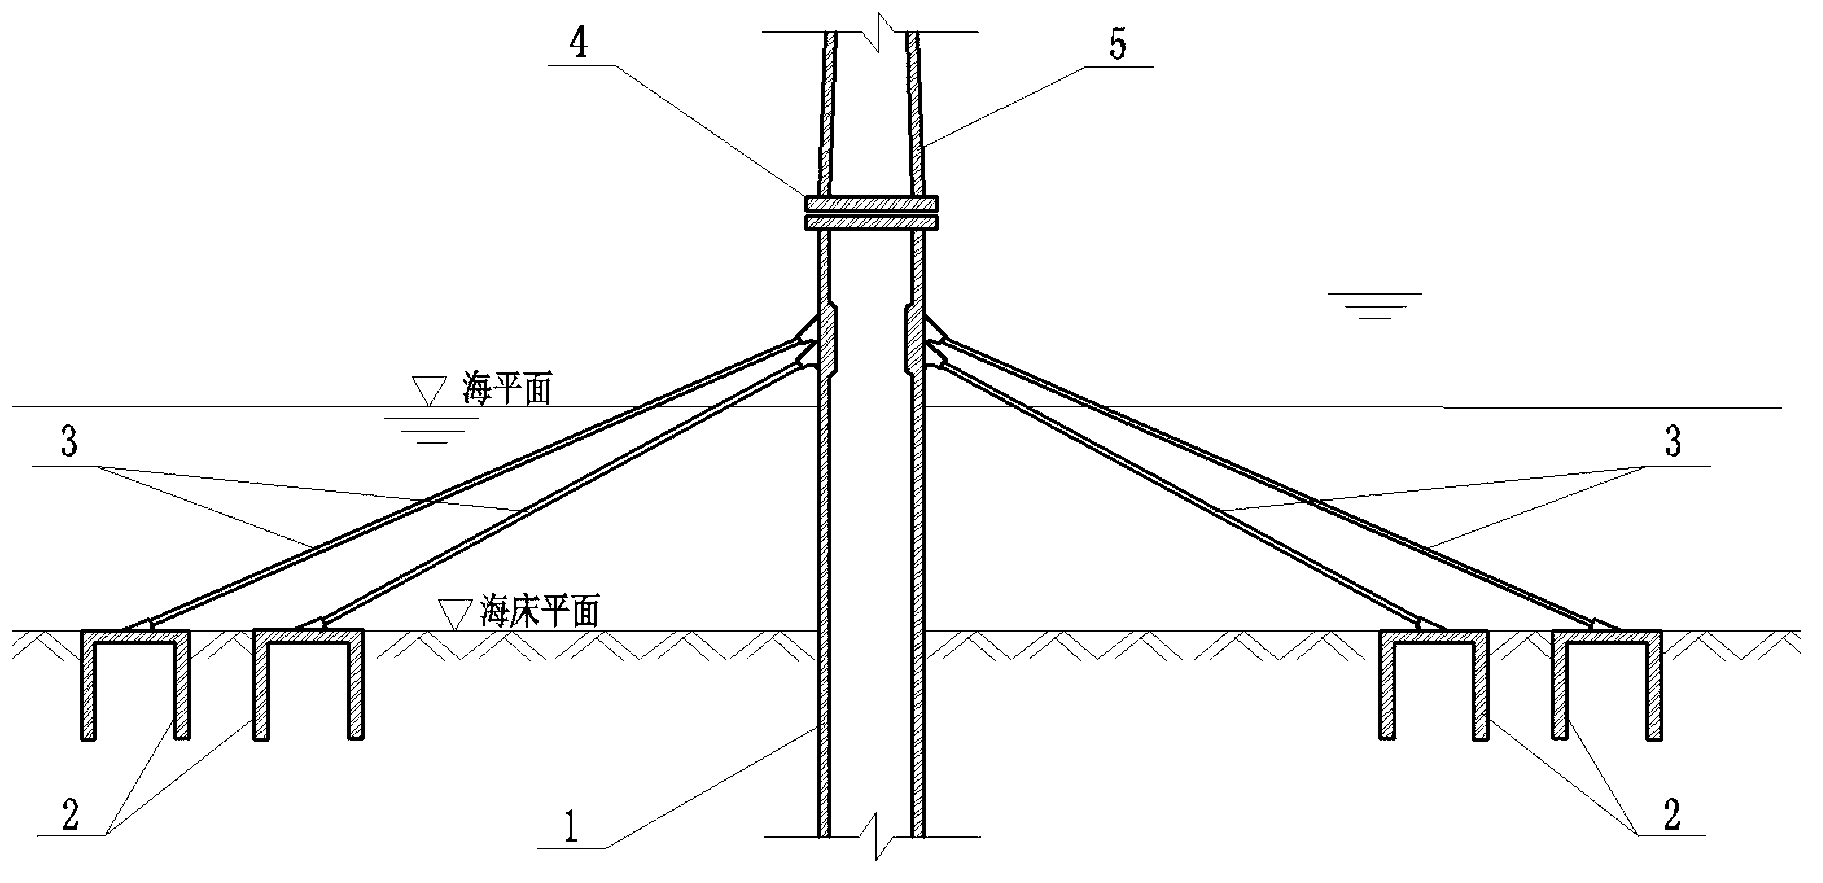 Offshore wind power foundation consisting of single pile, cylindrical foundations and anchor cable